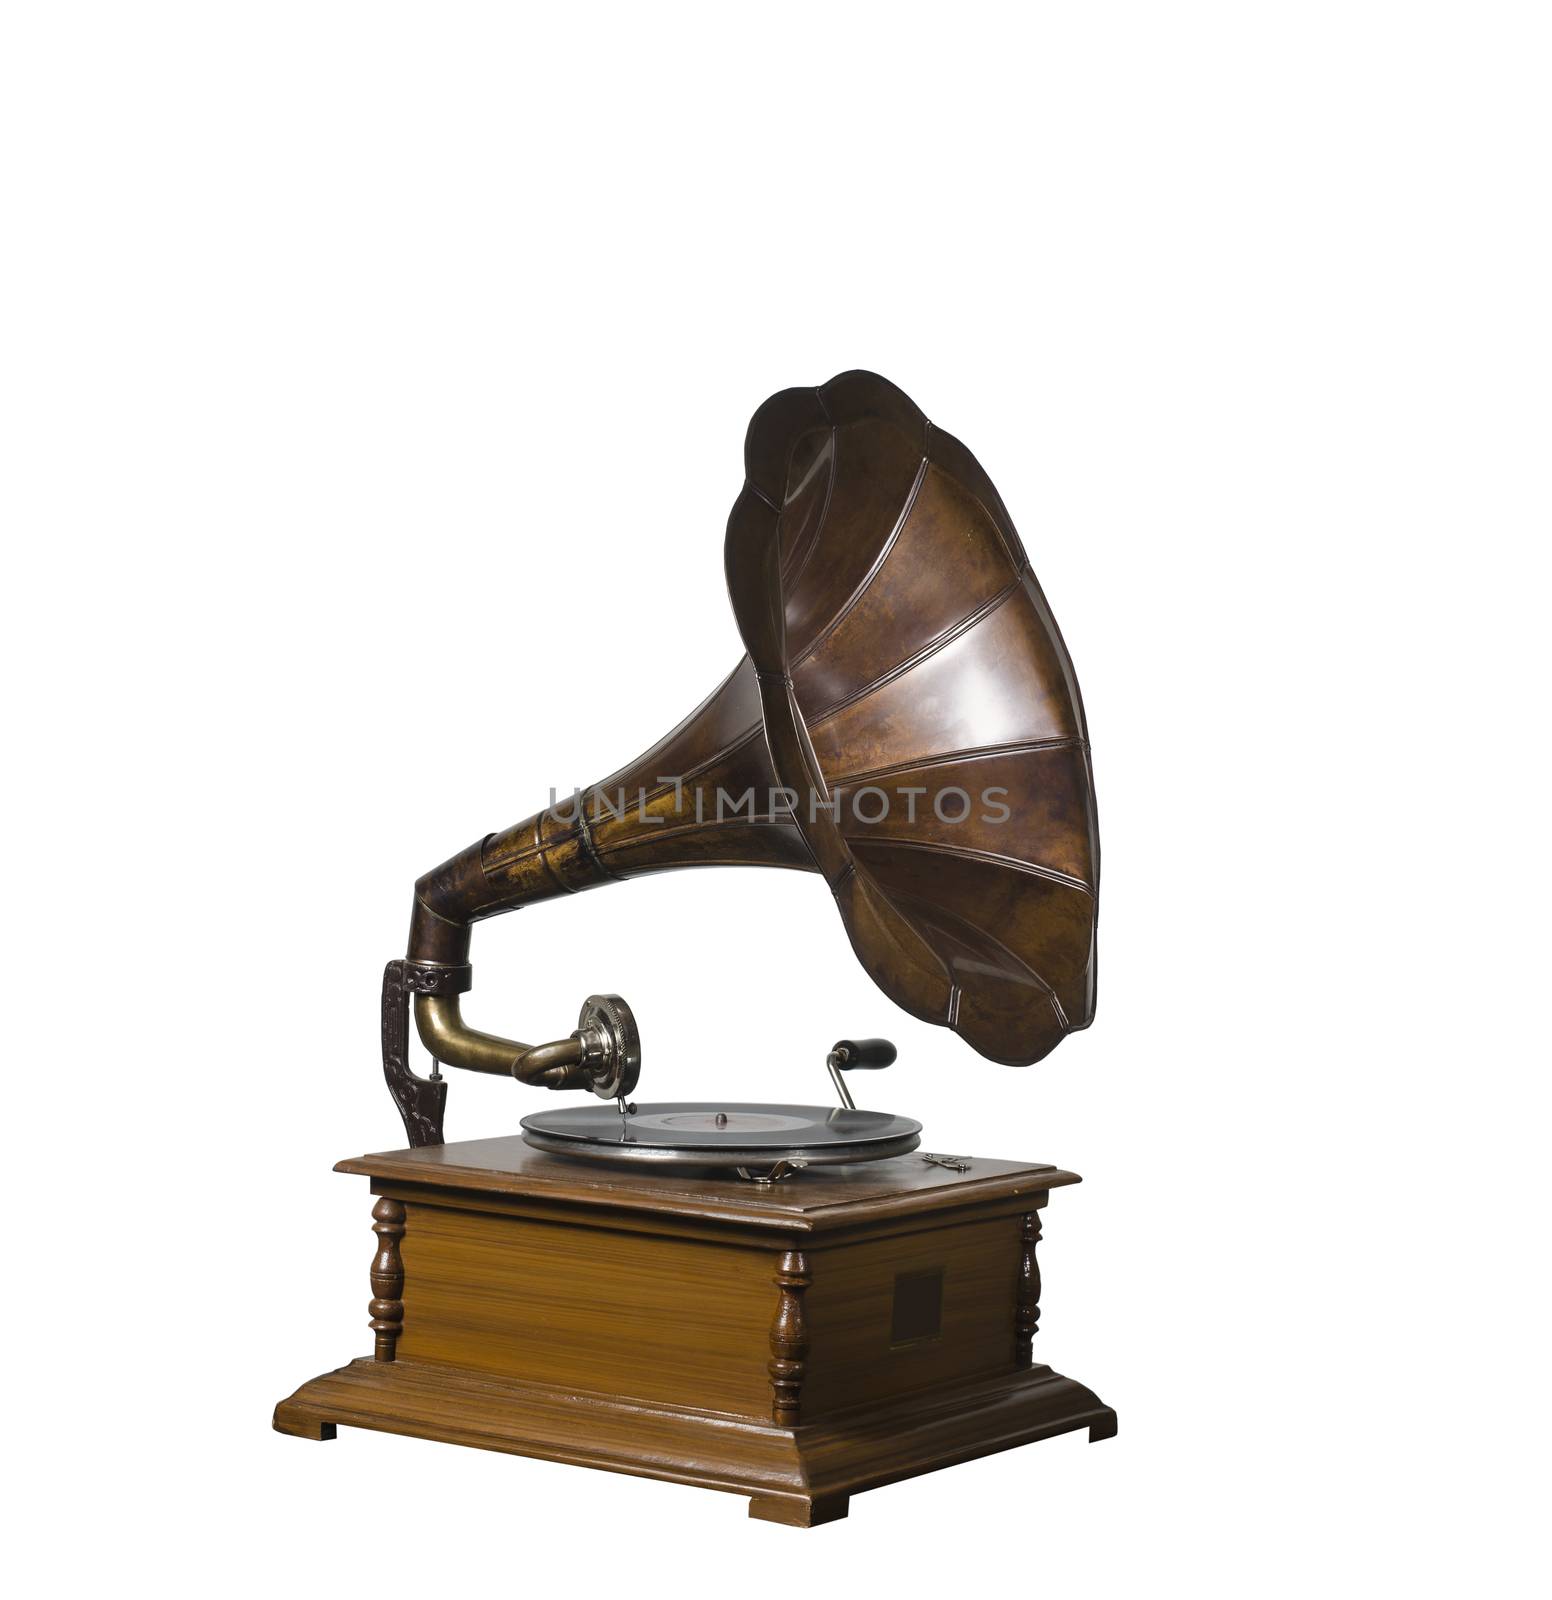 Classic Gramophone on white background by Paulmatthewphoto